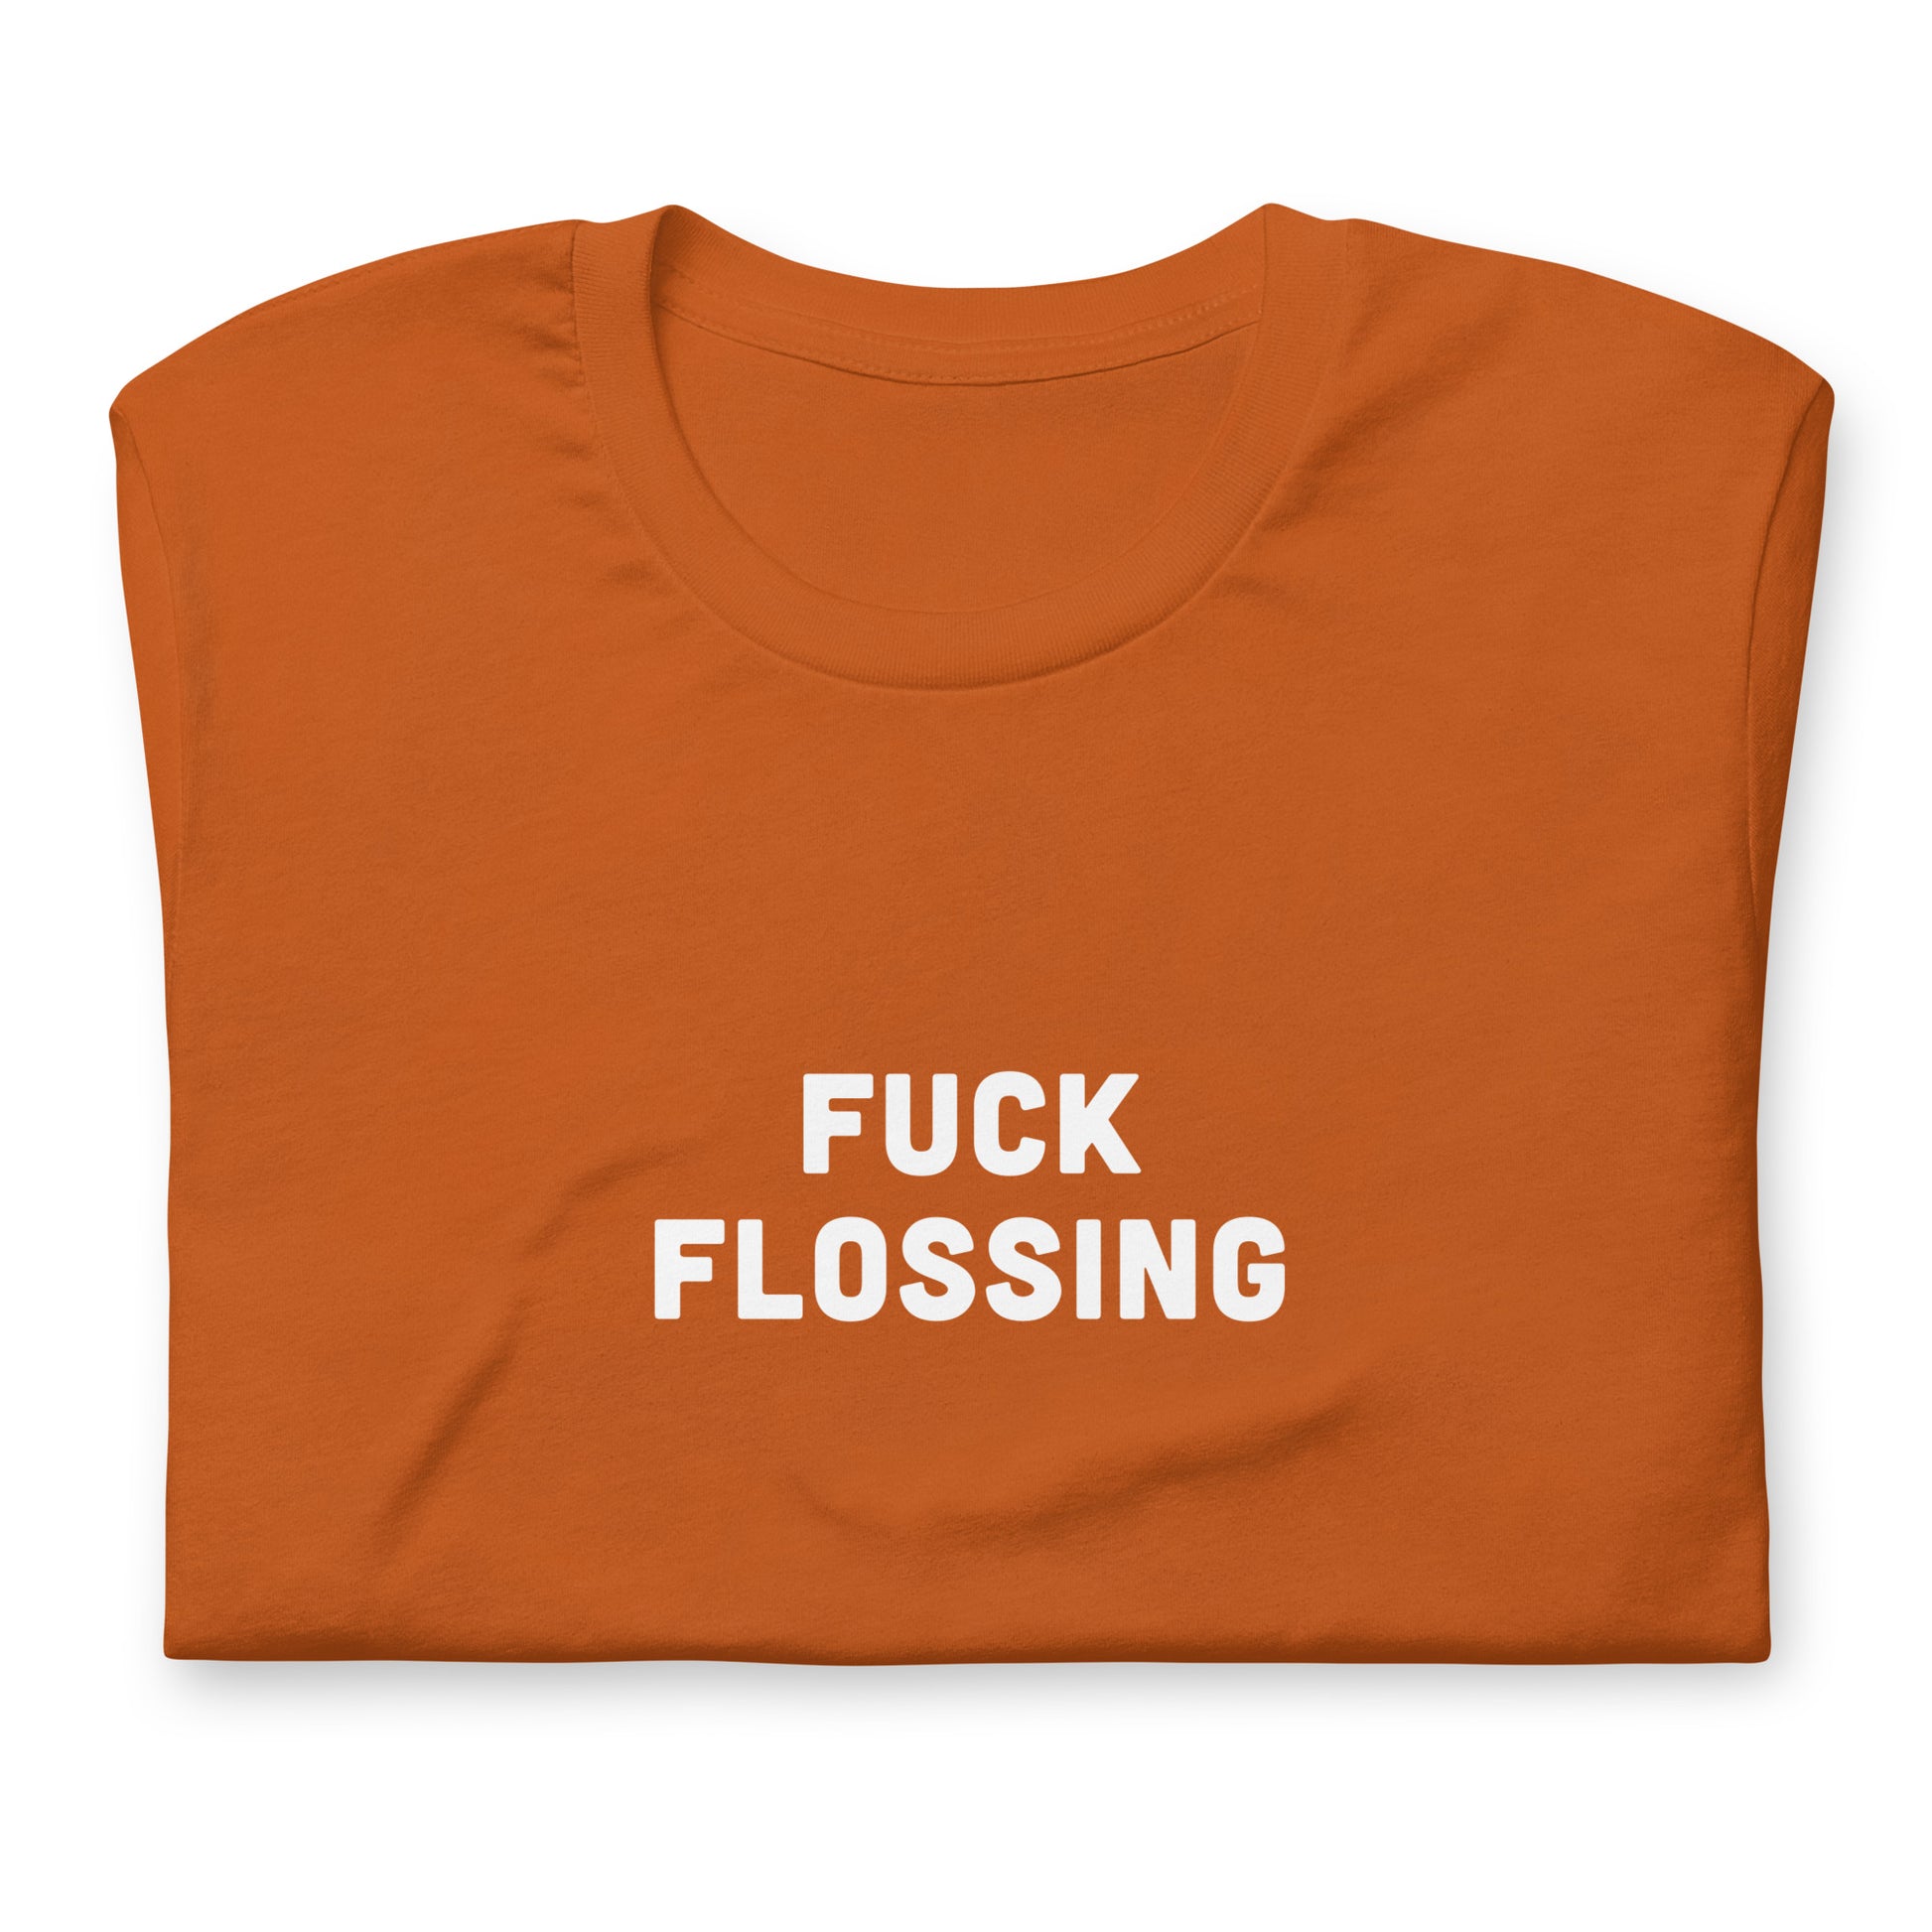 Fuck Flossing T-Shirt Size M Color Navy